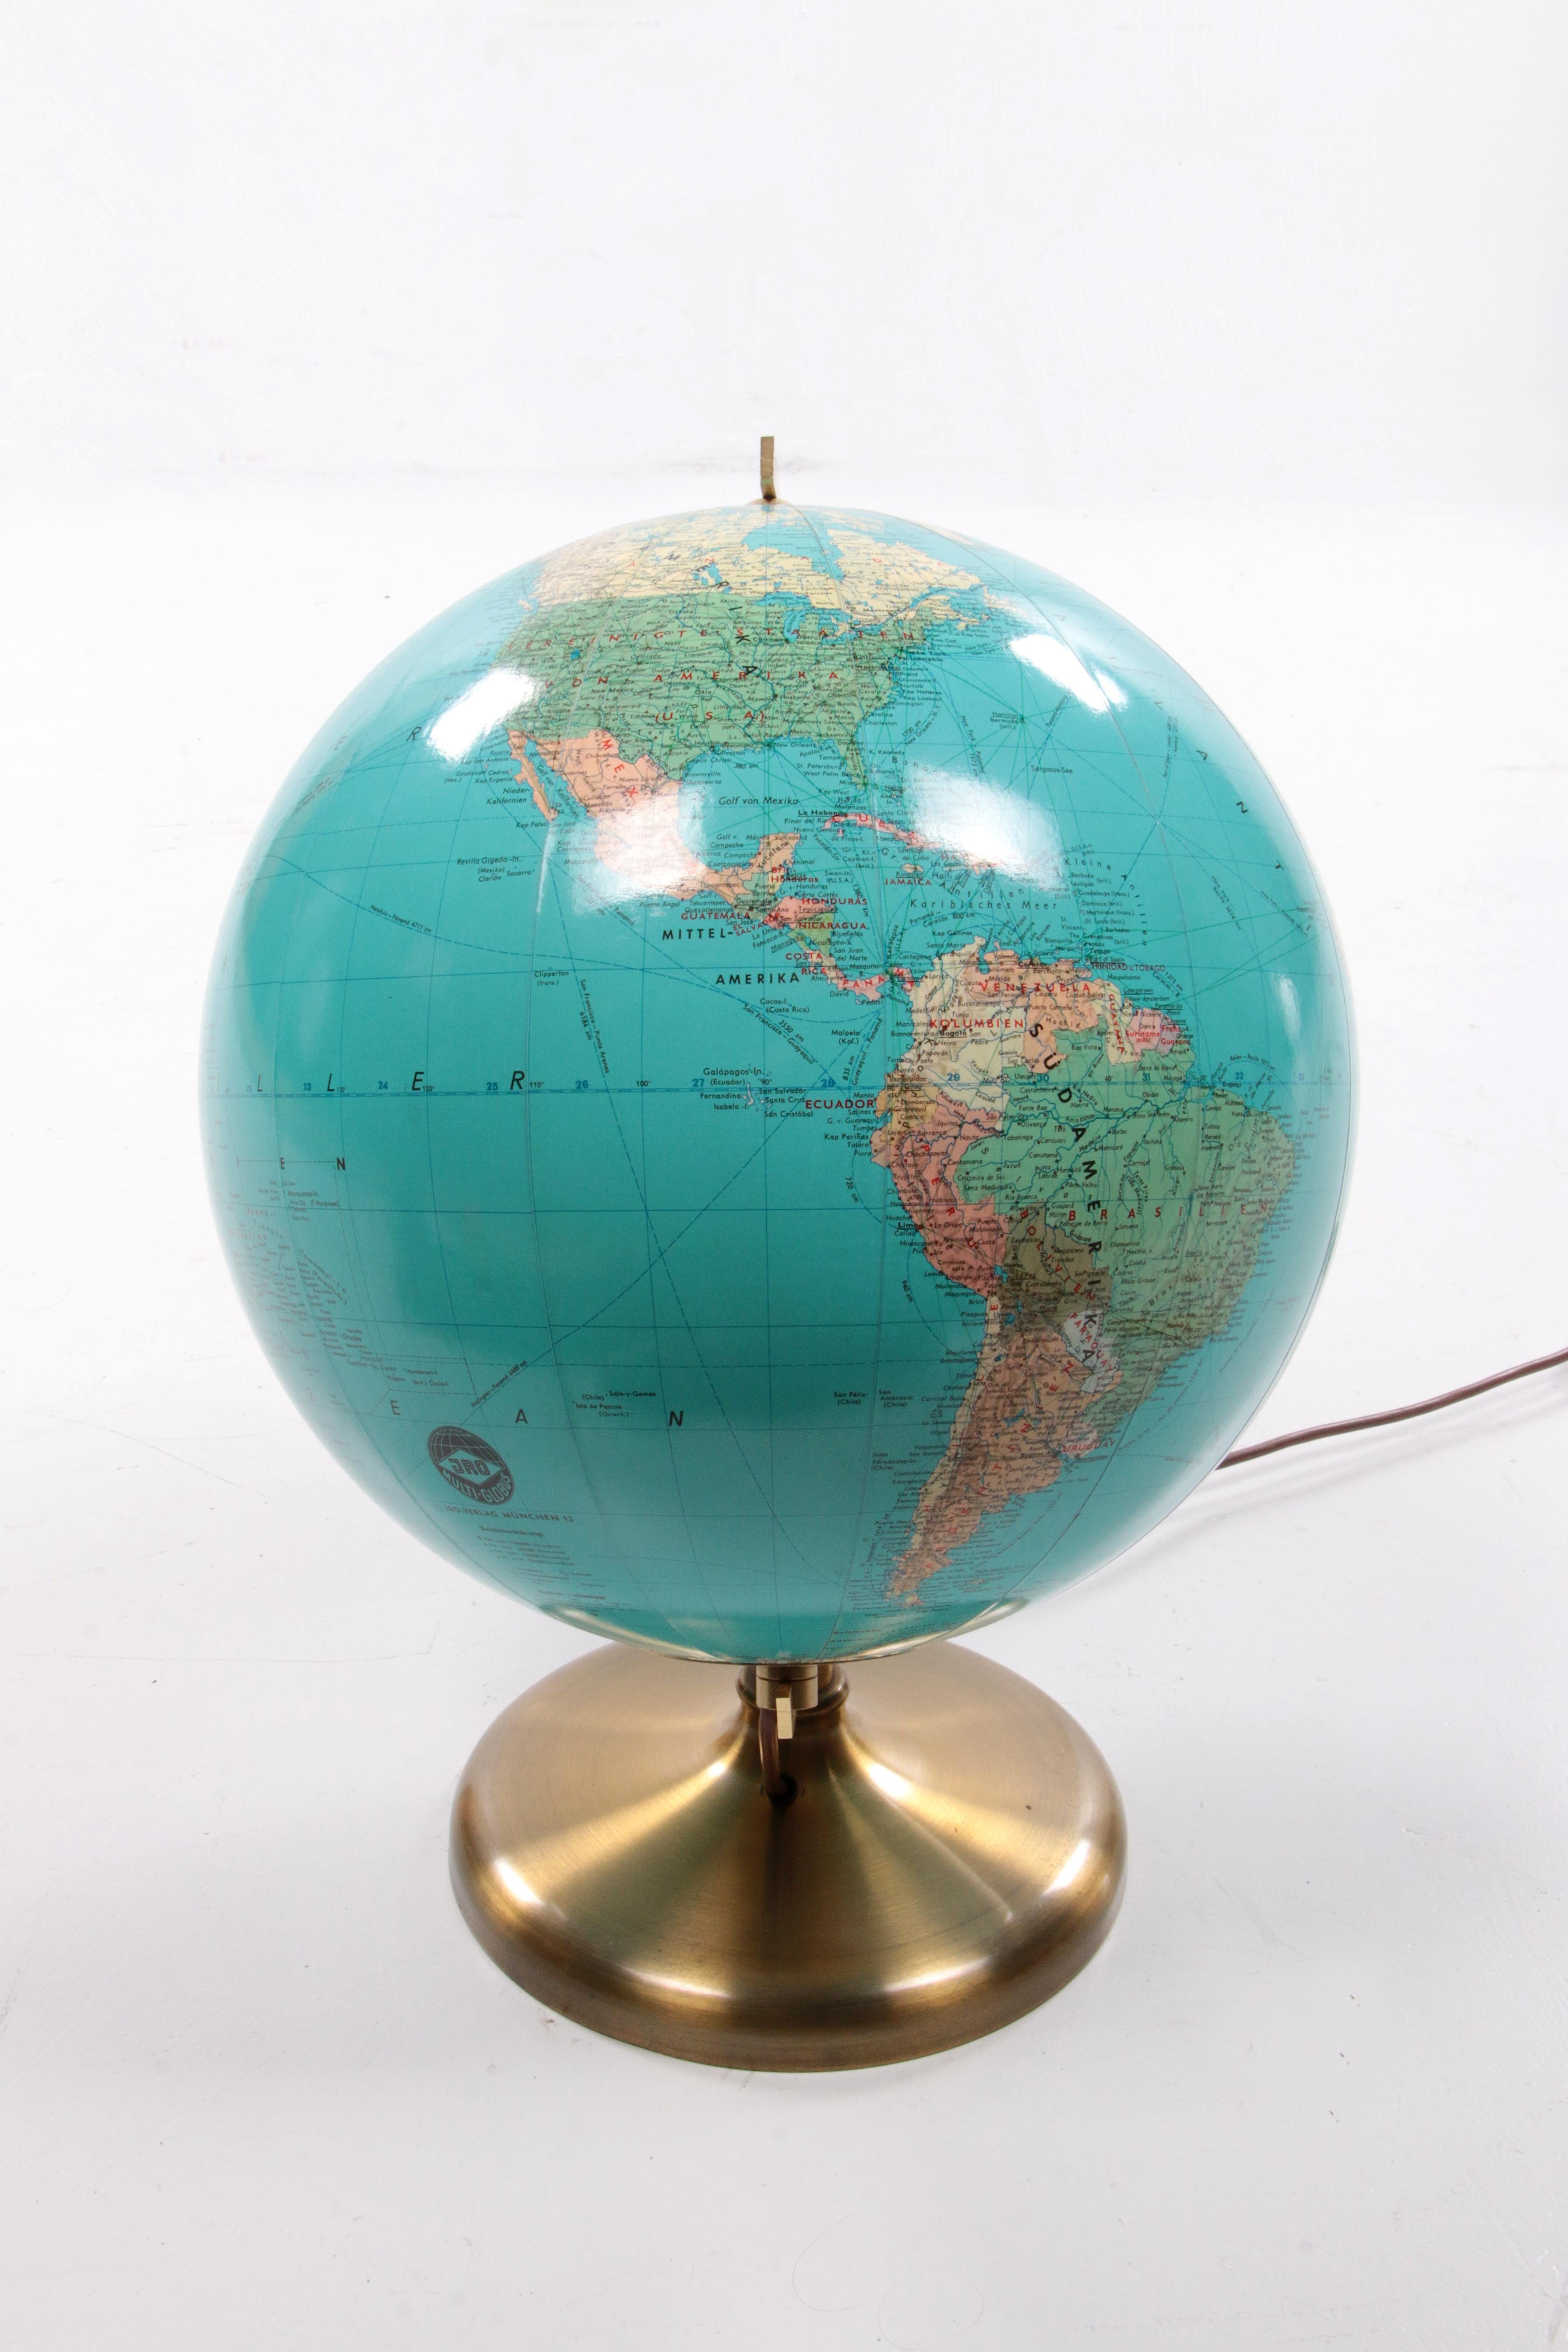 20th Century Glass Globe with Light in it  from Jro Verlag Munchen, Germany 1970